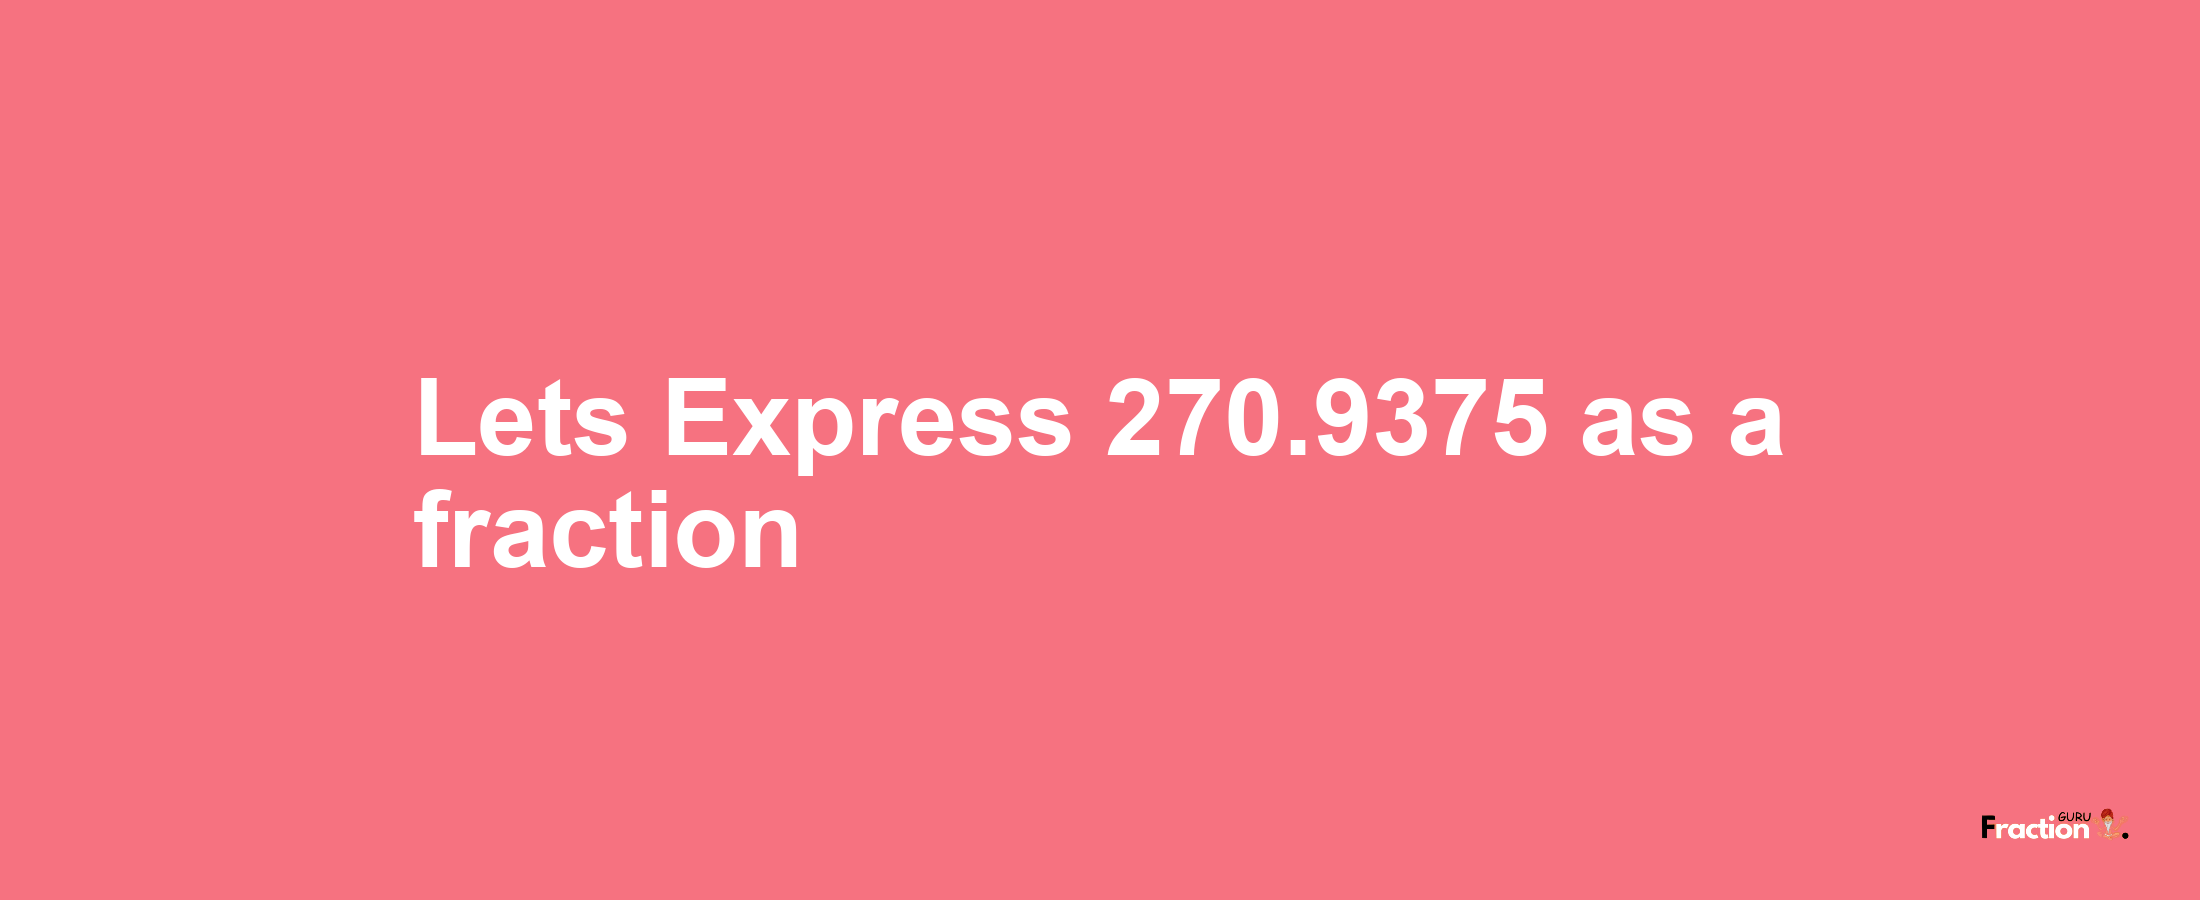 Lets Express 270.9375 as afraction